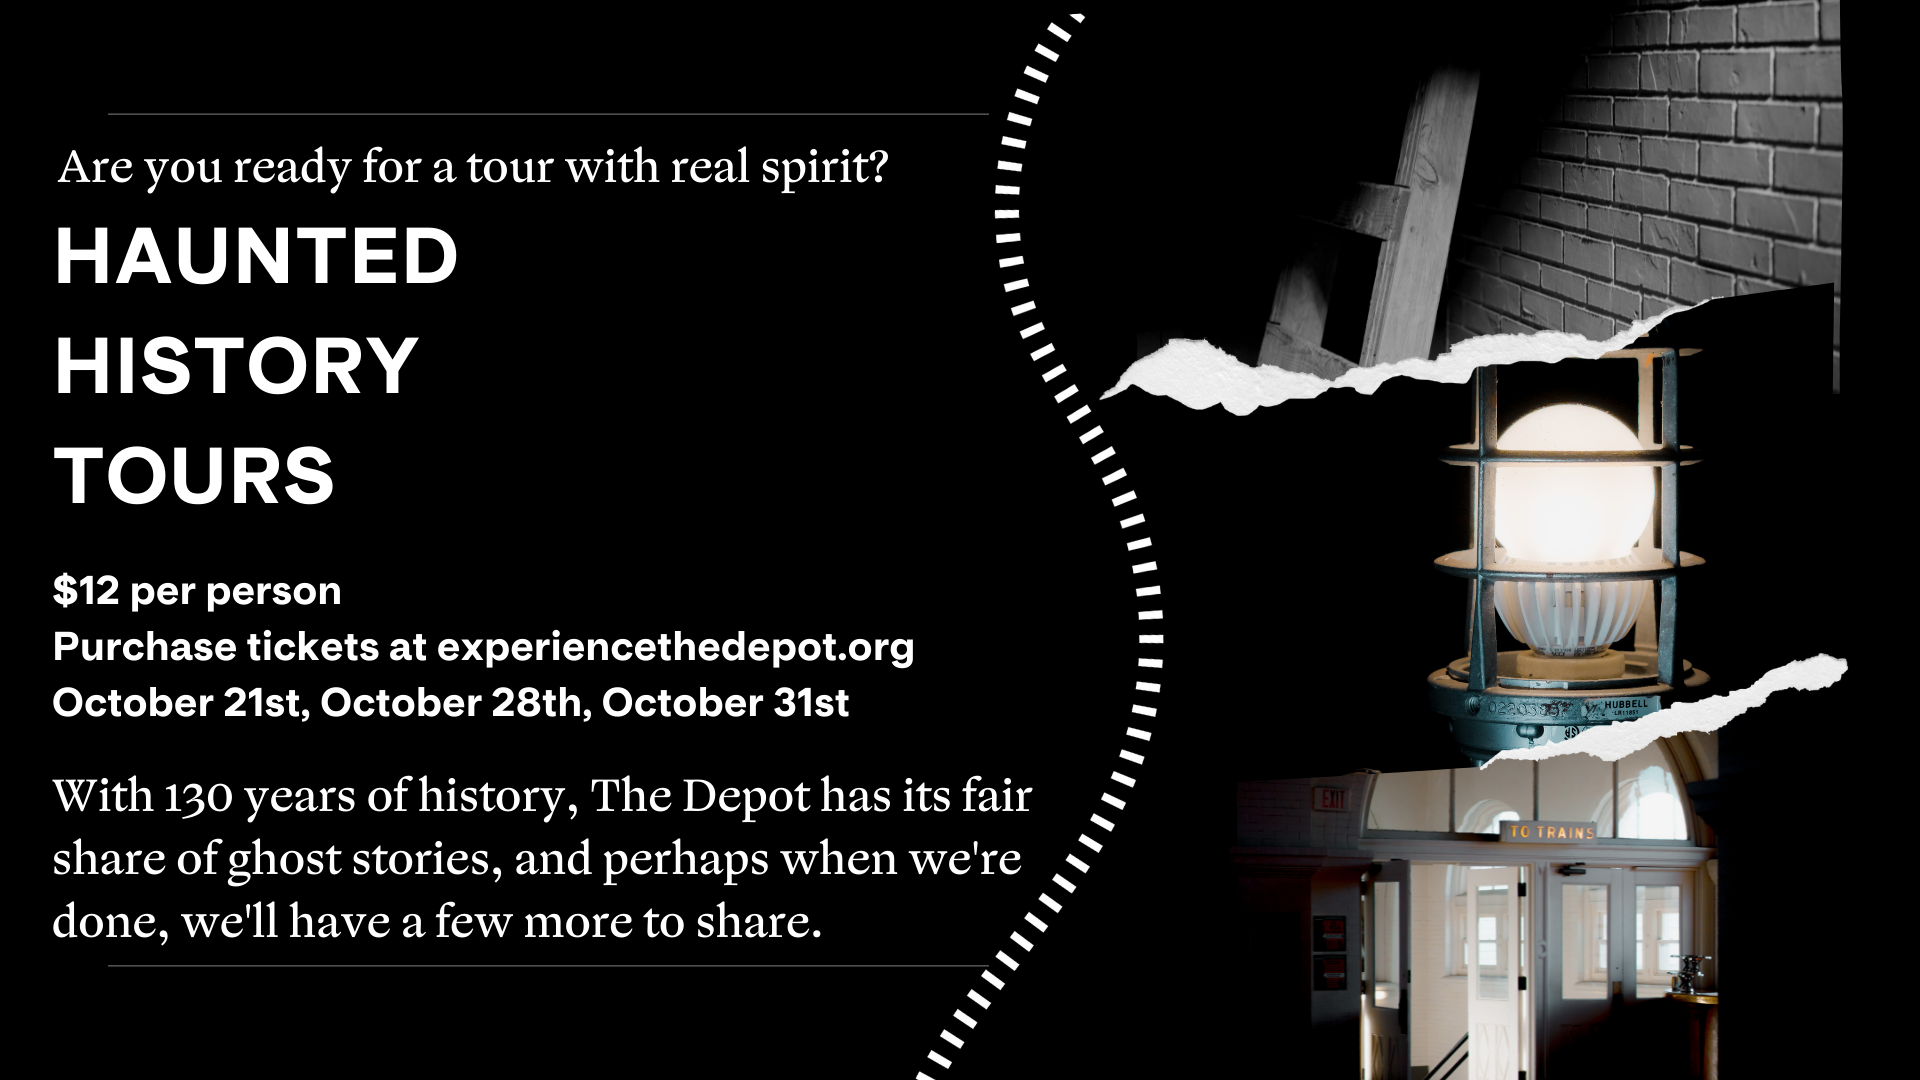 The Depot Haunted History Tour